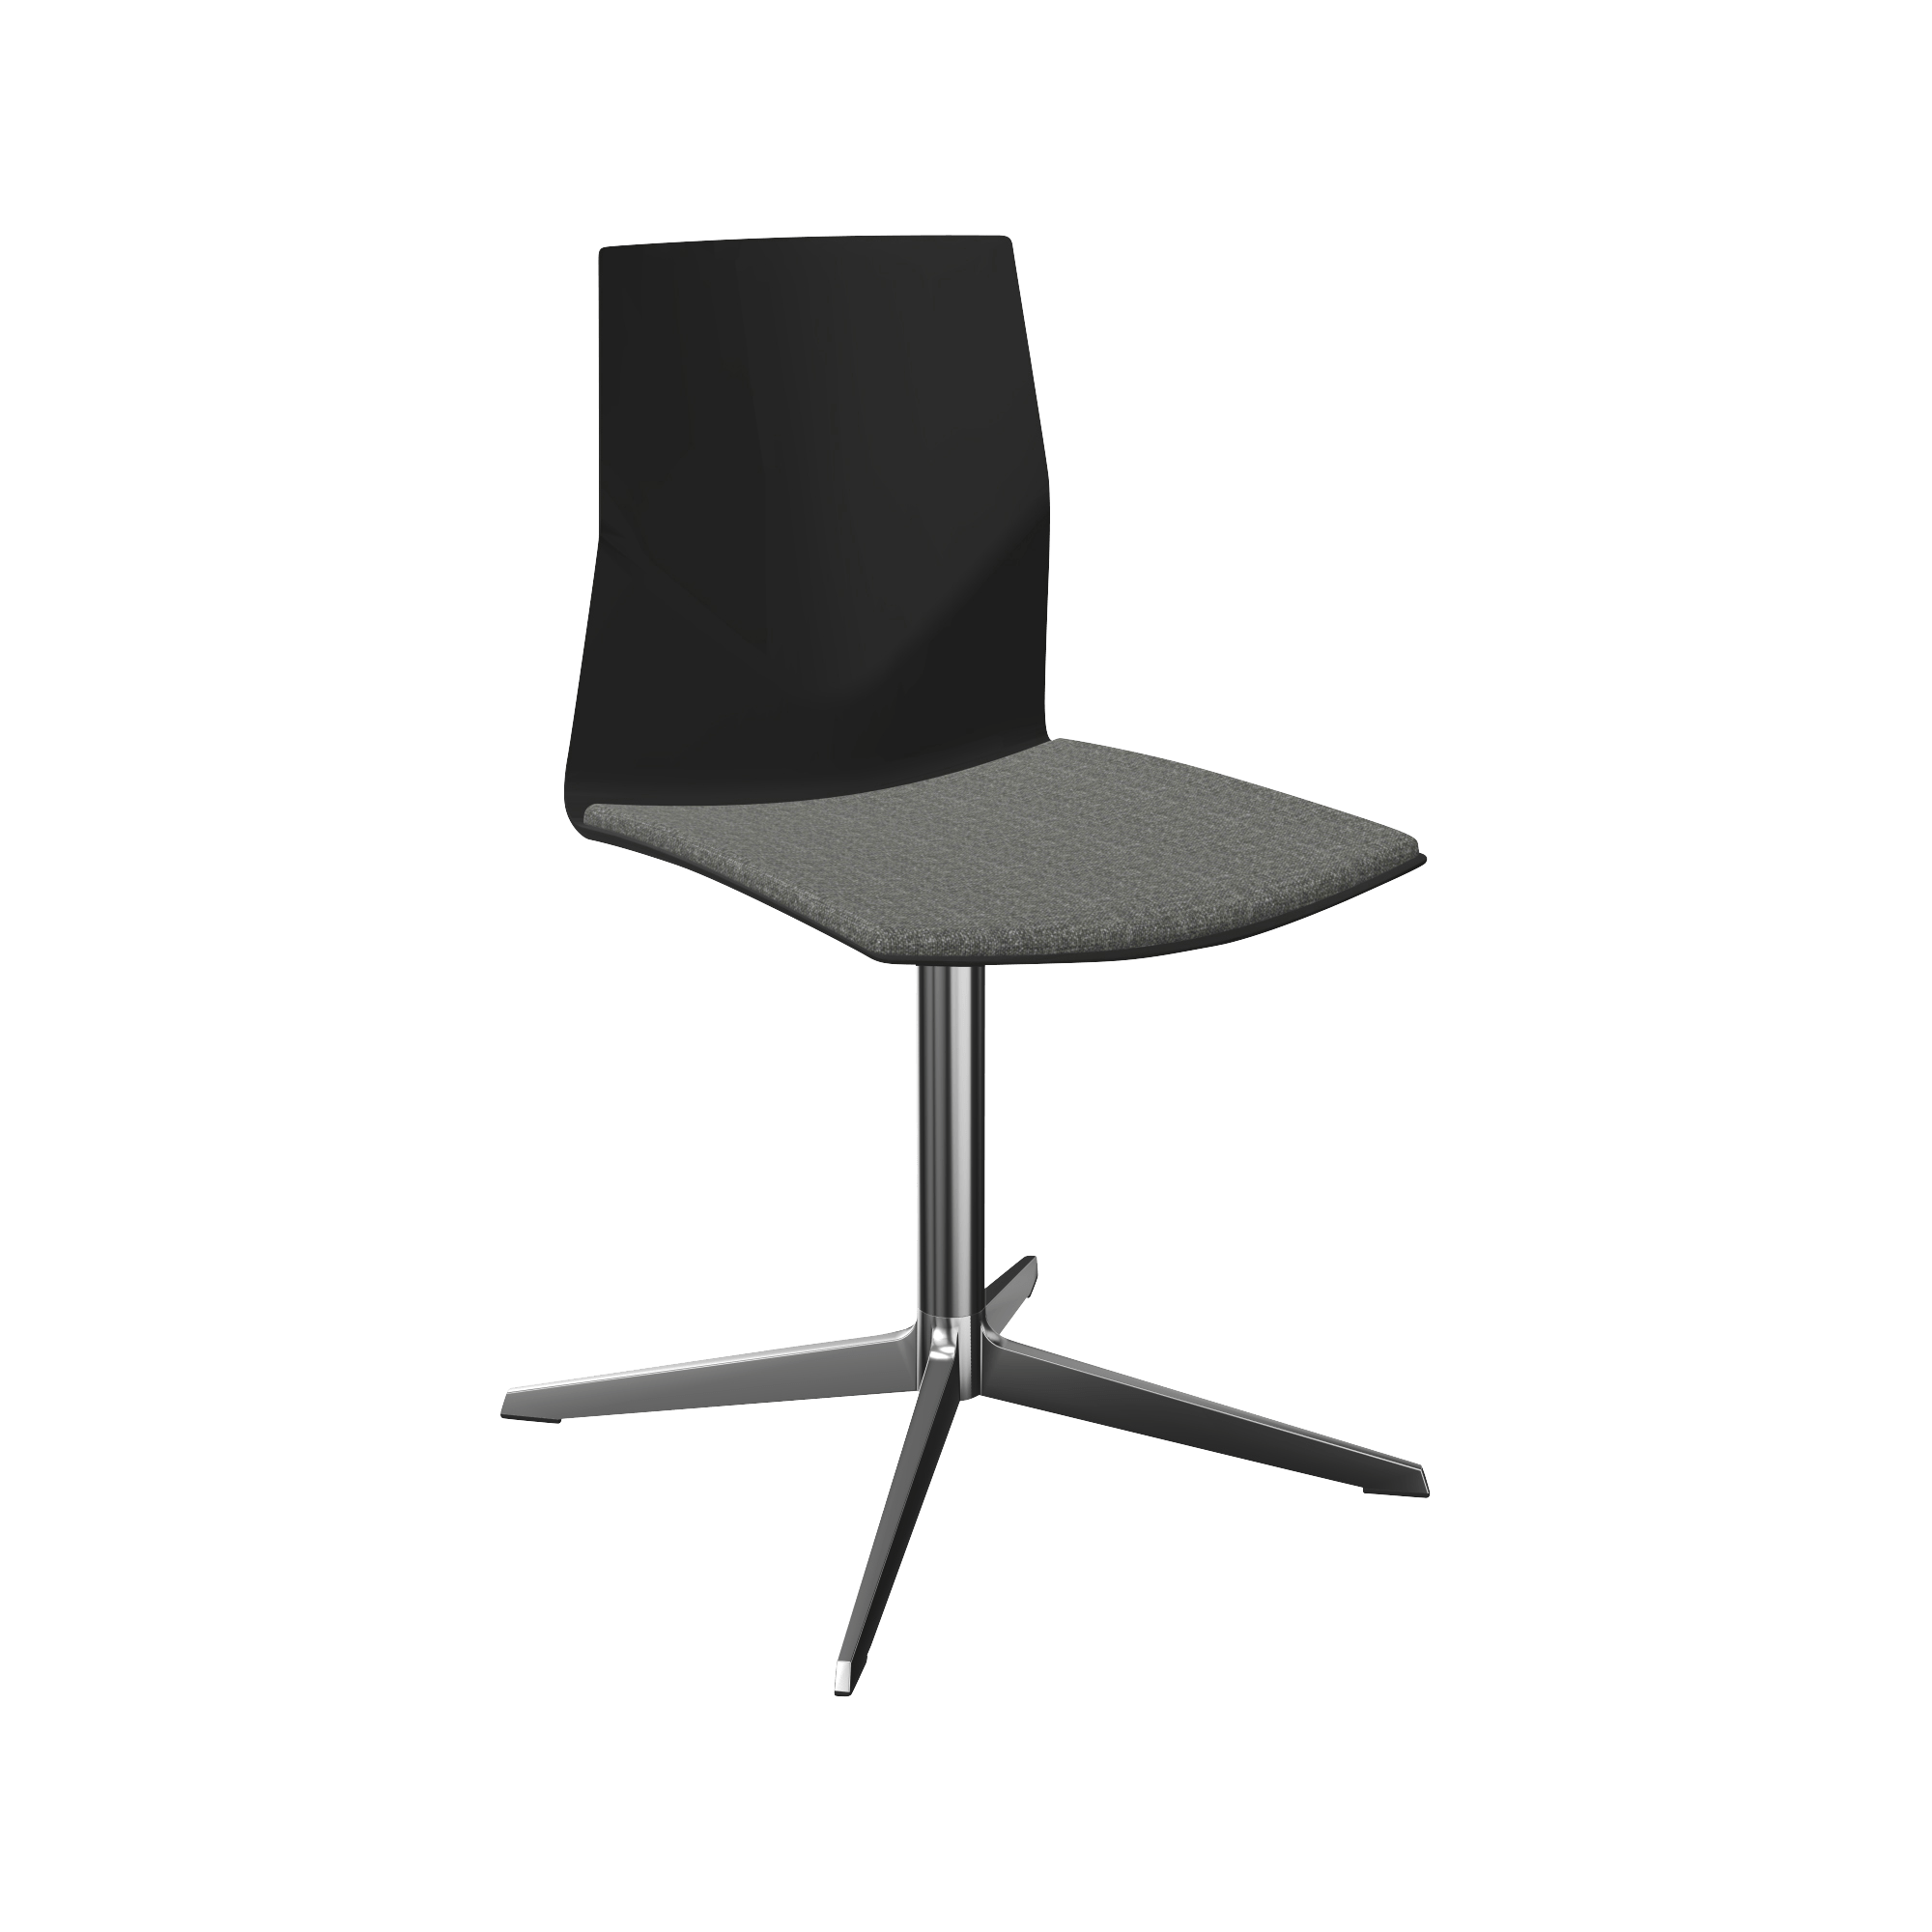 A black office chair with a grey seat and a chrome pedestal leg